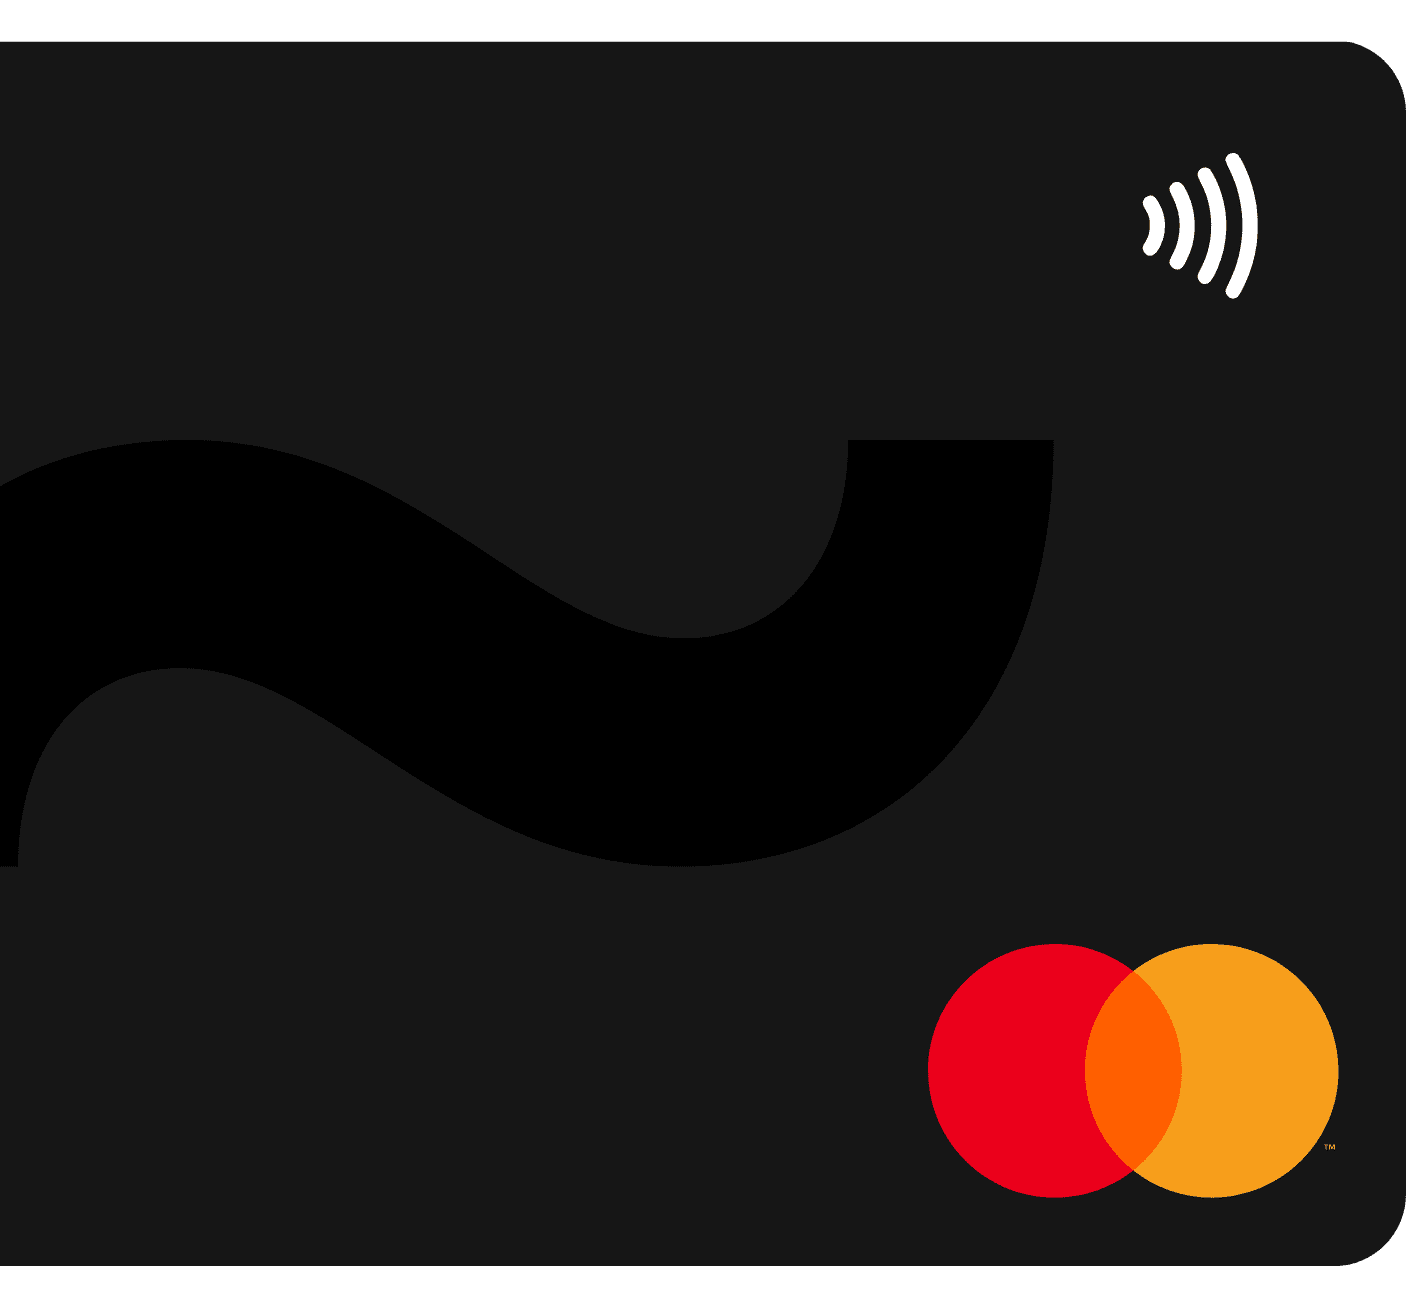 Telda card with contactless payment logo and mastercard logo